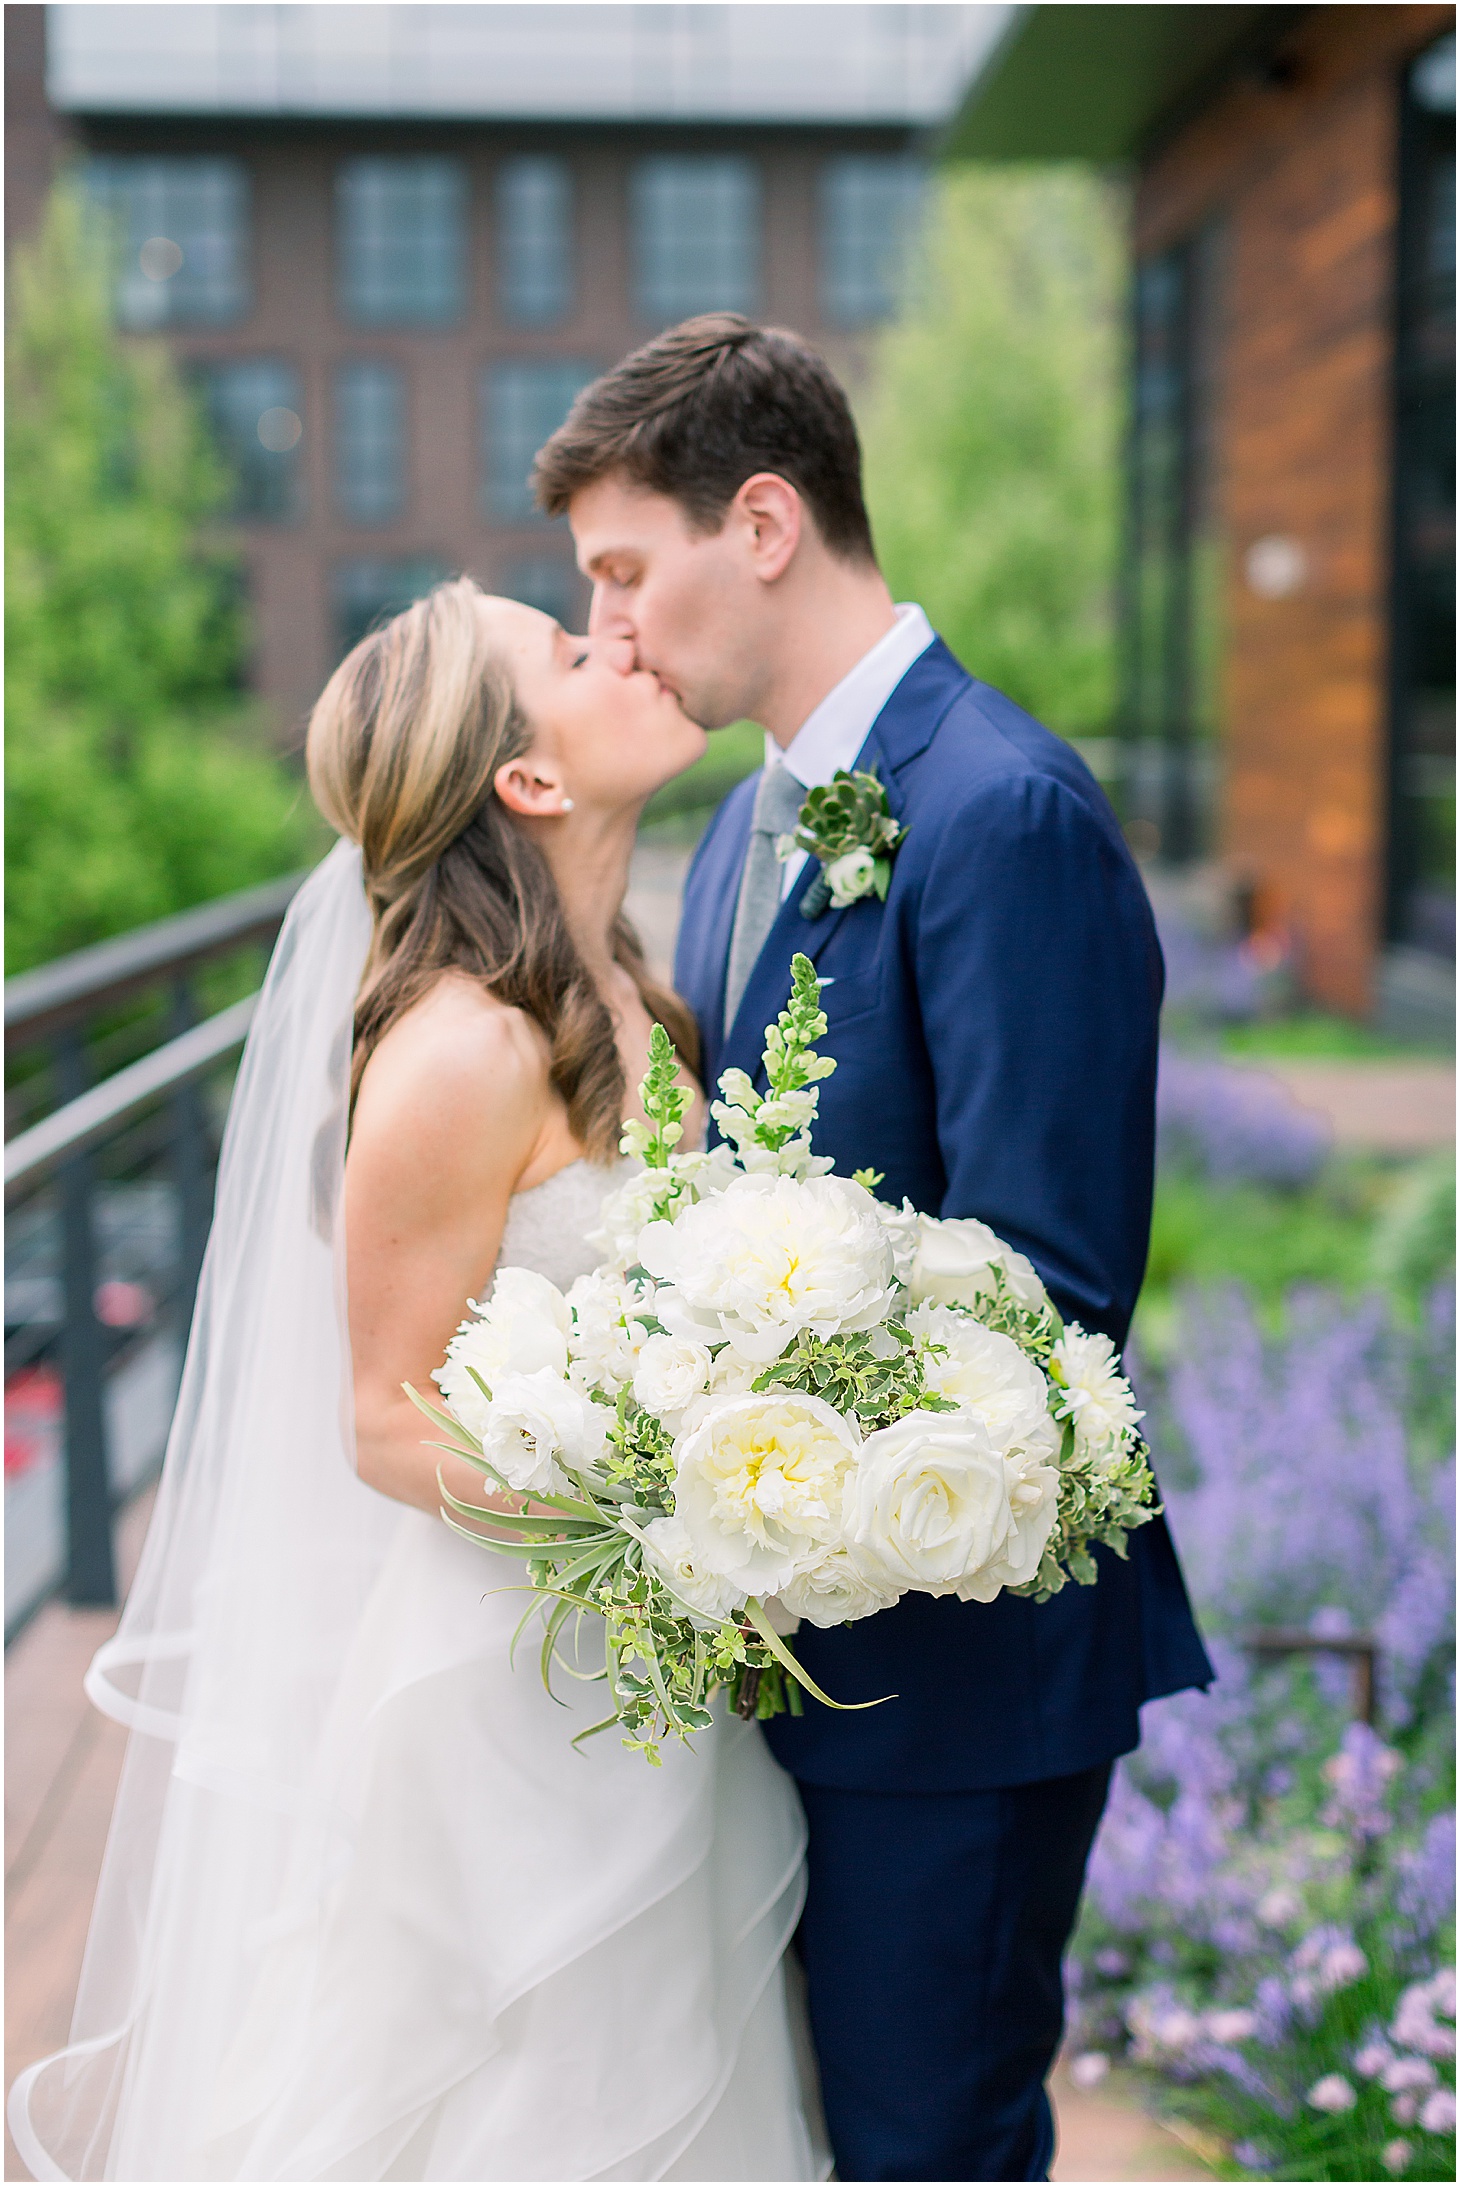 Spring Wedding Portraits at District Winery in DC,Modern Textural Spring Wedding at District Winery, Sarah Bradshaw Photography, DC Wedding Photographer